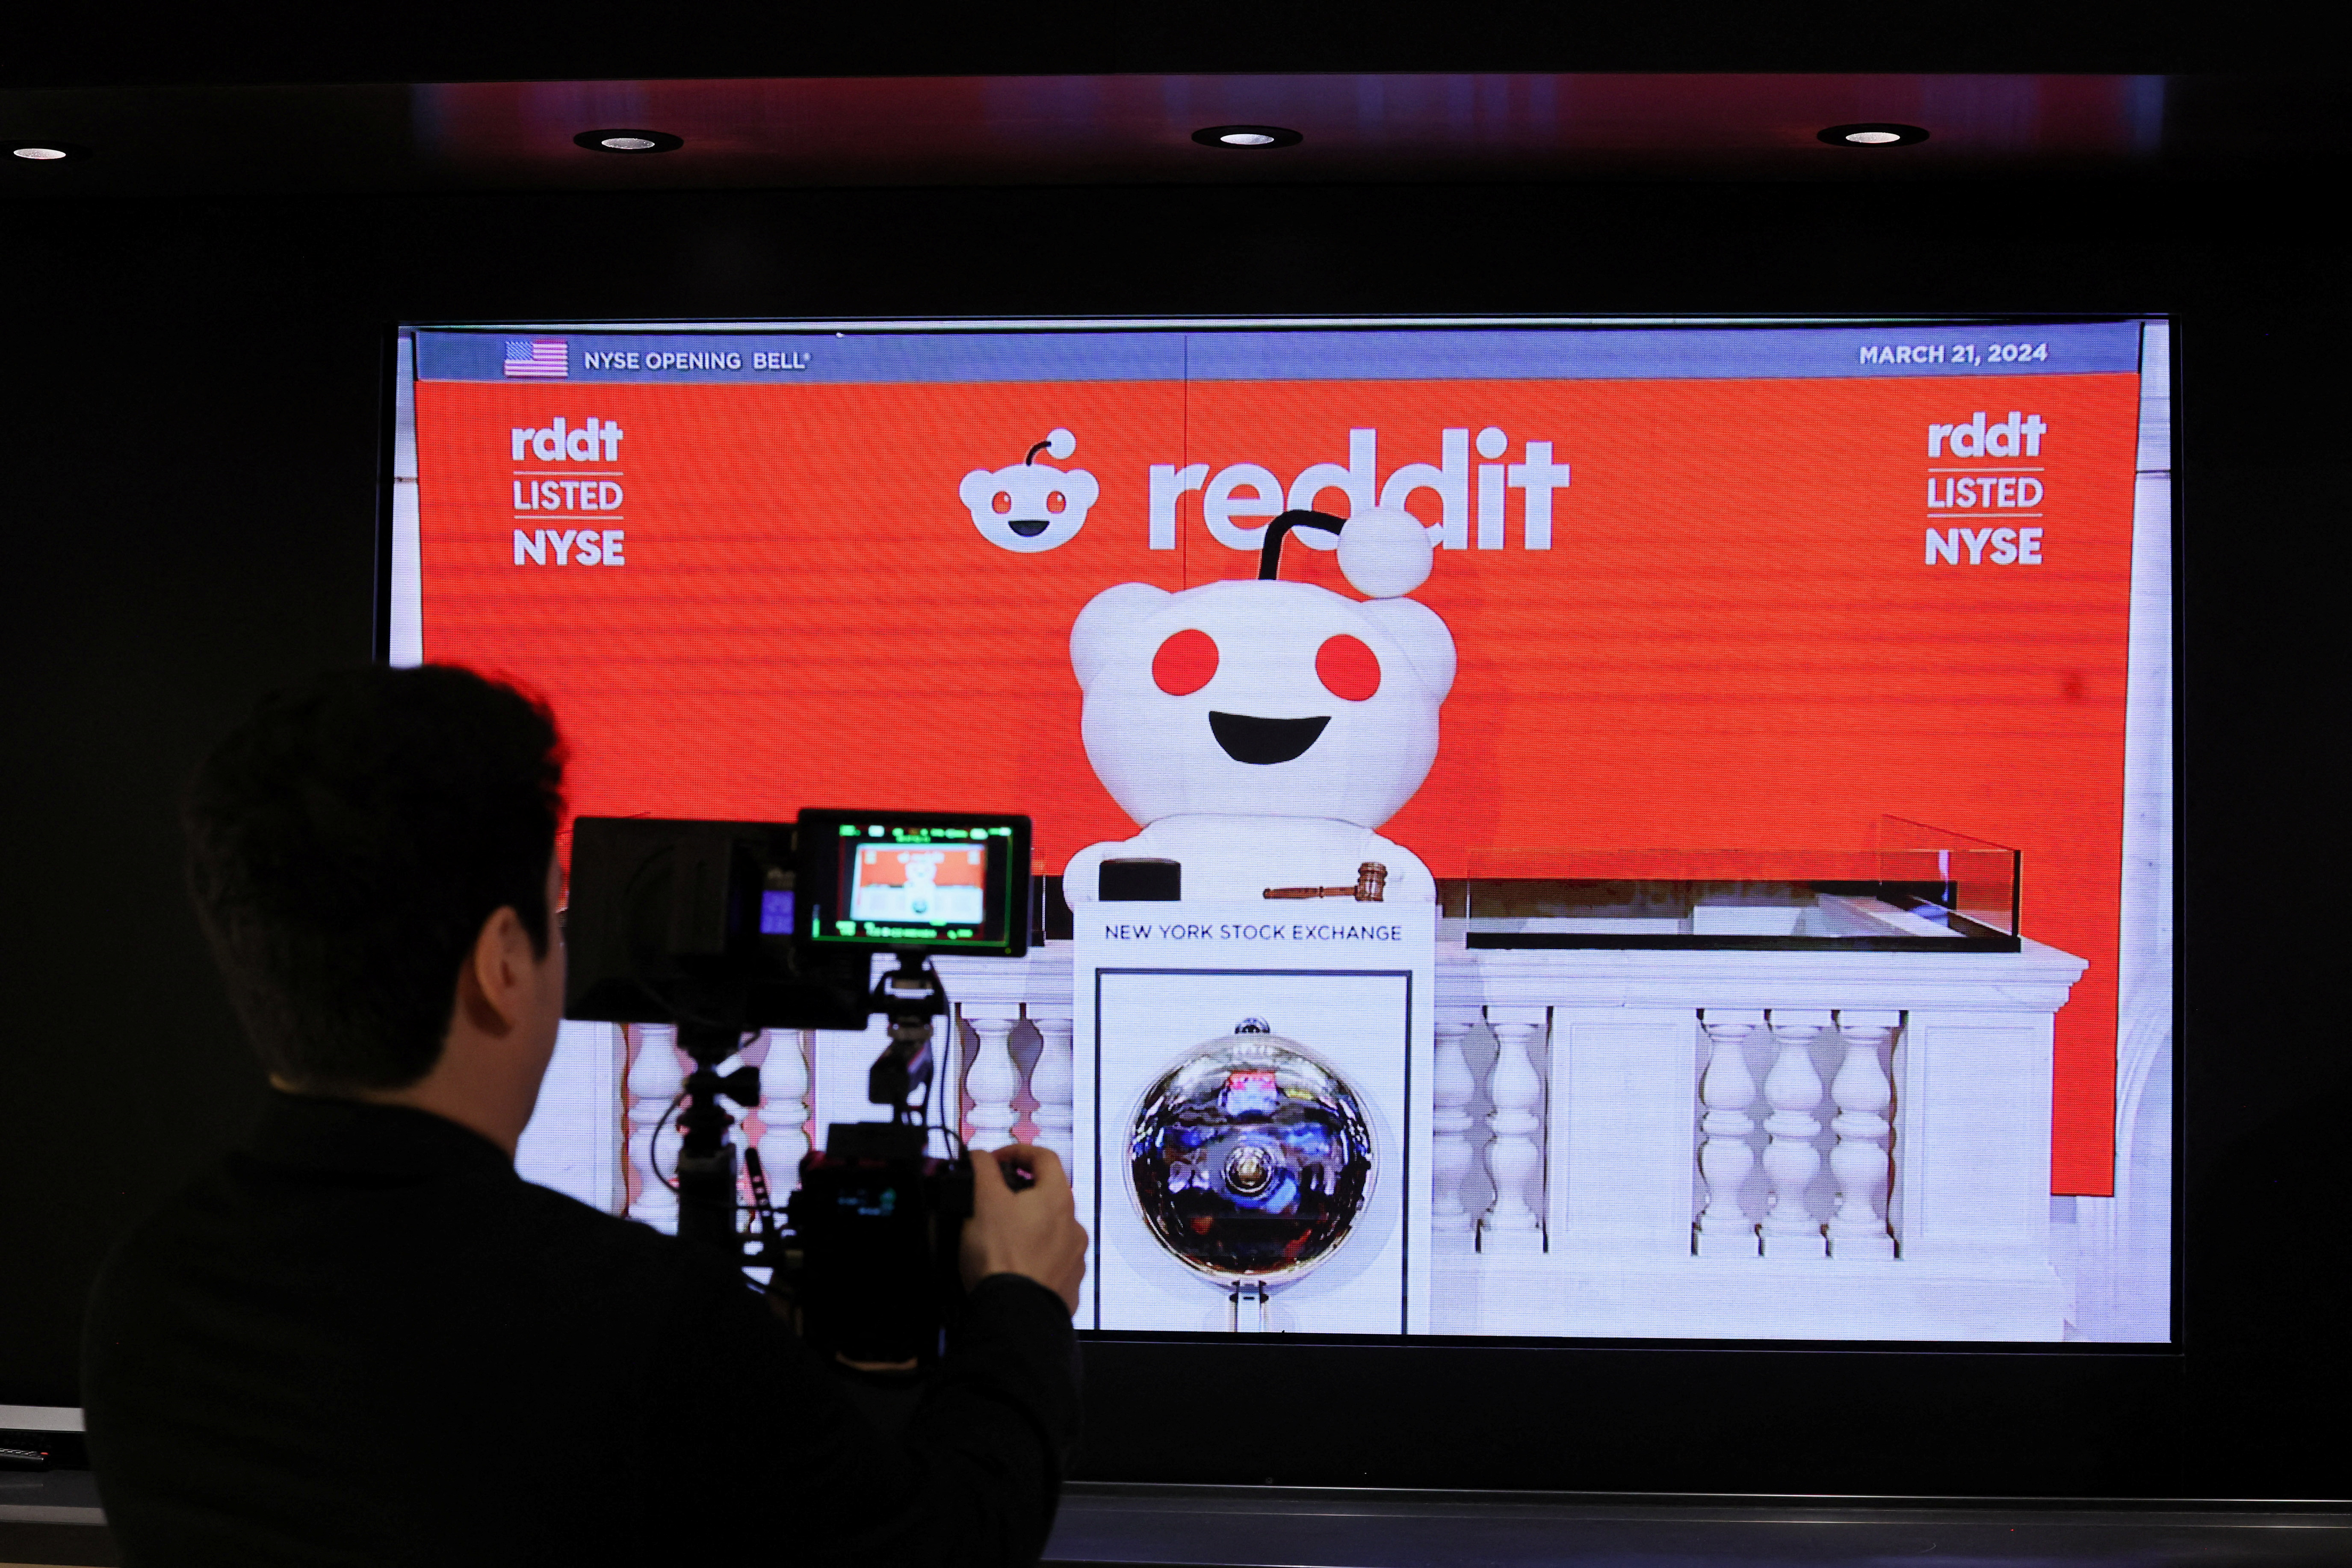 Reddit IPO at the NYSE in New York